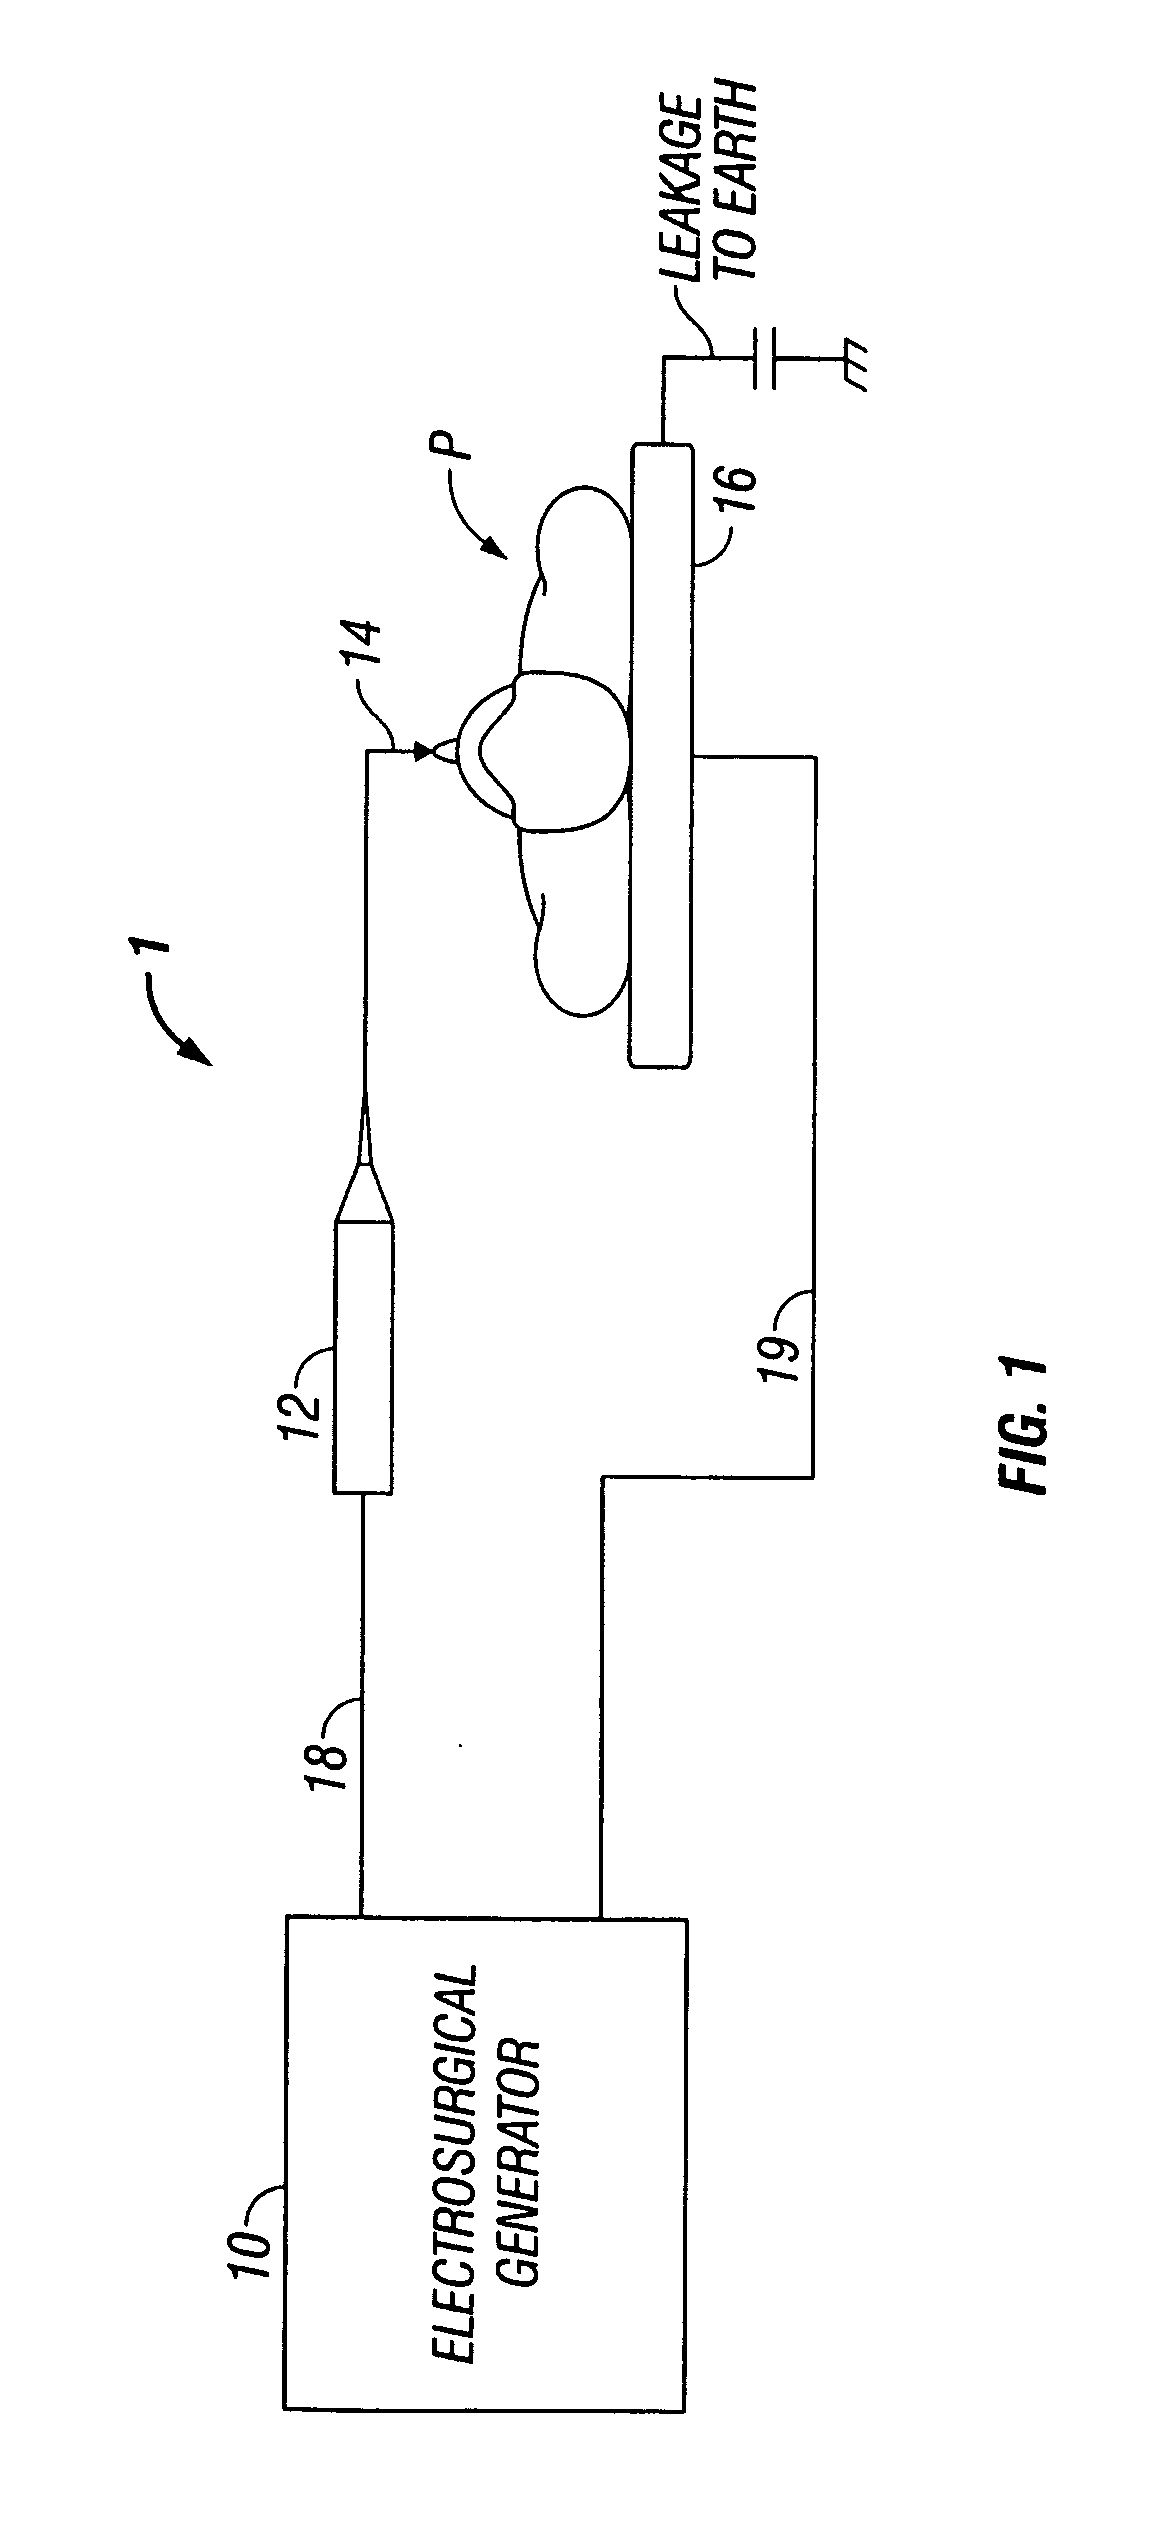 System and method for reducing leakage current in an electrosurgical generator